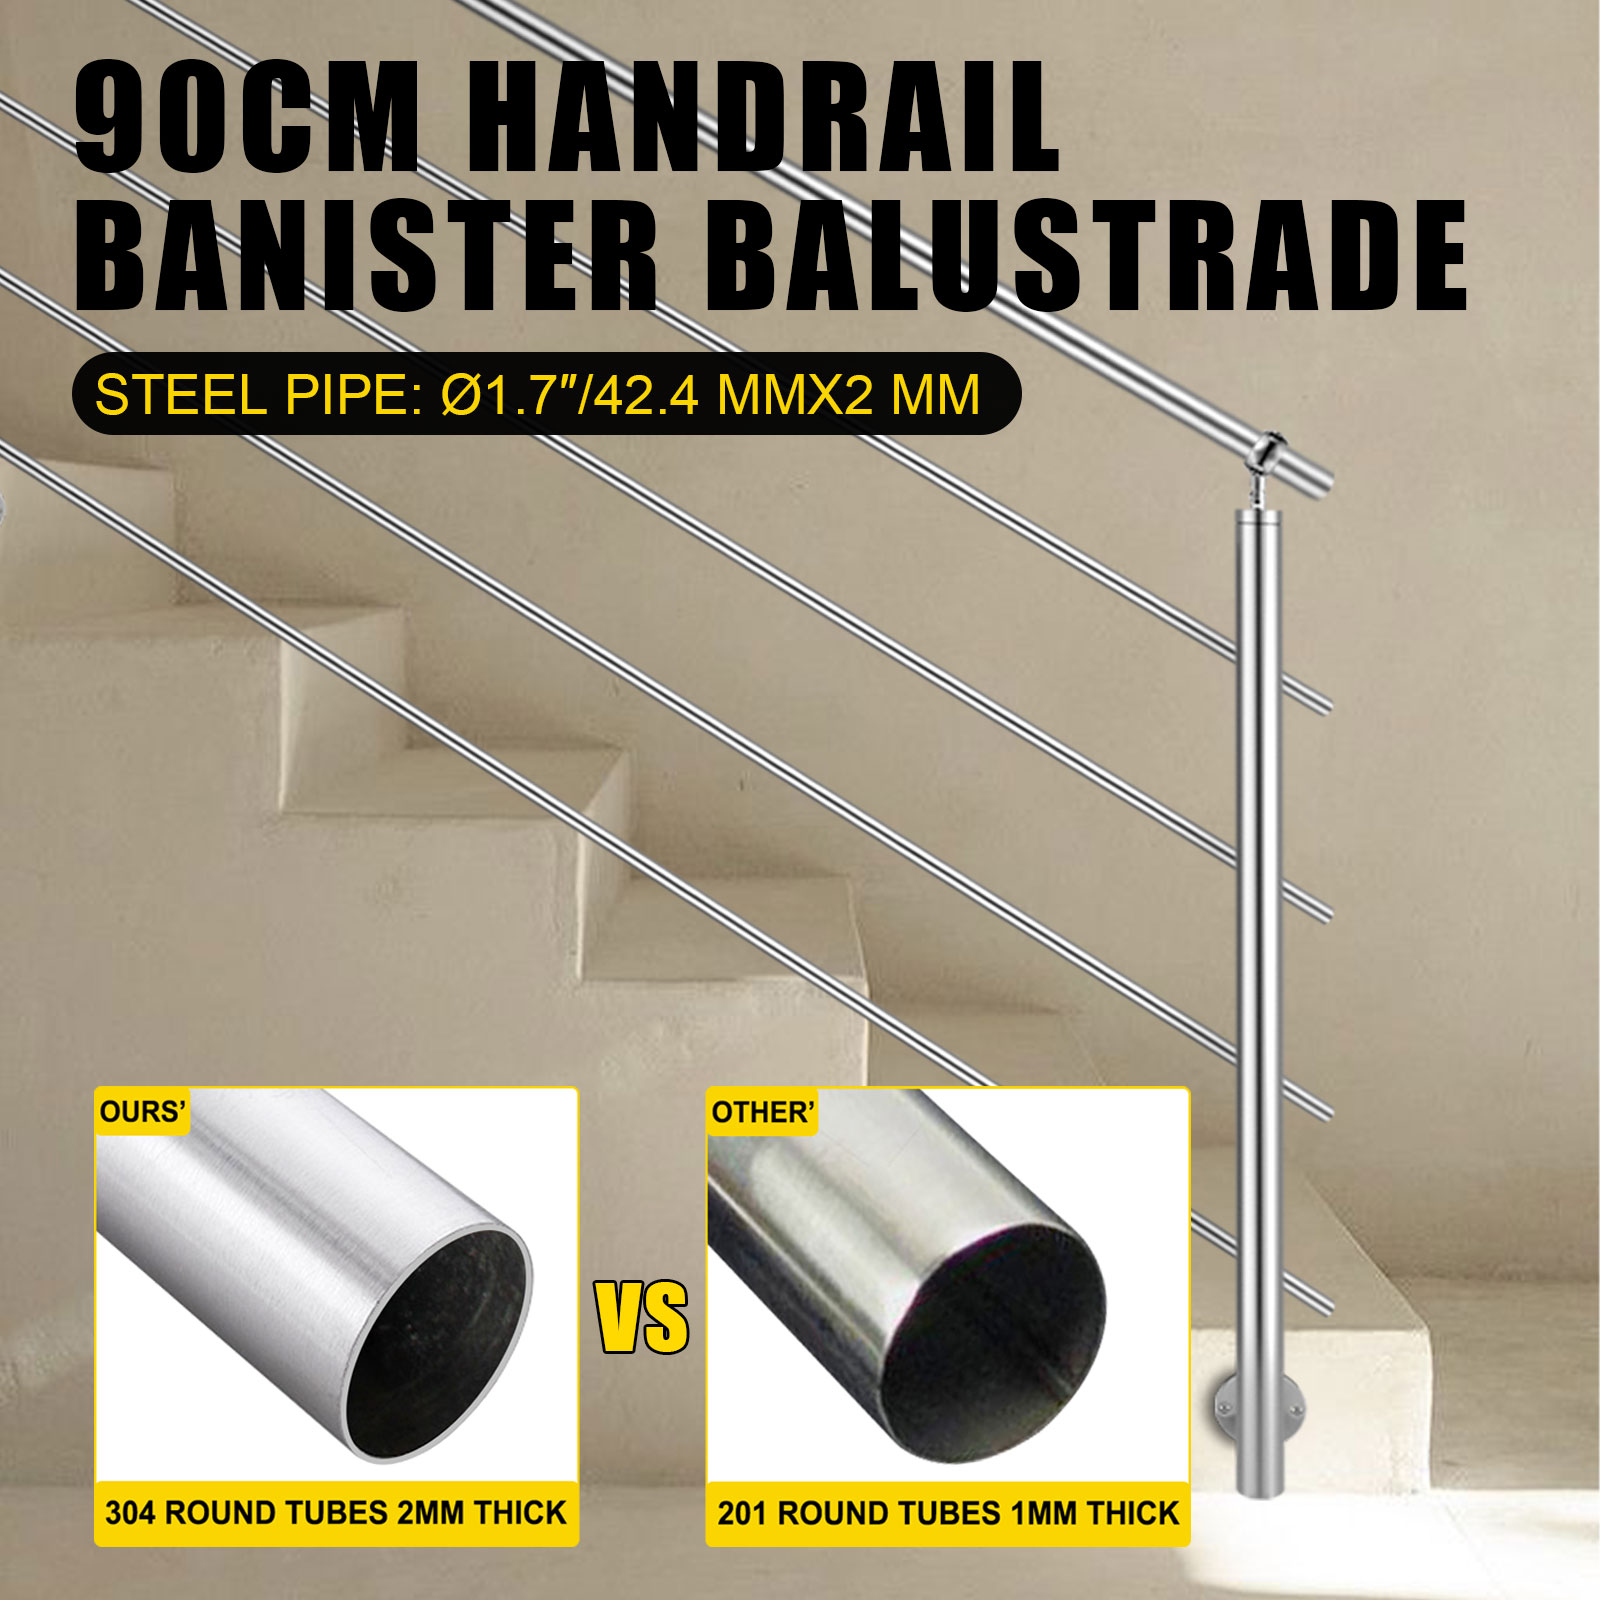 https://d2qc09rl1gfuof.cloudfront.net/product/BXGLGHQ90CMBG3HG1/adjustable-angle-stair-rail-m100-3.jpg